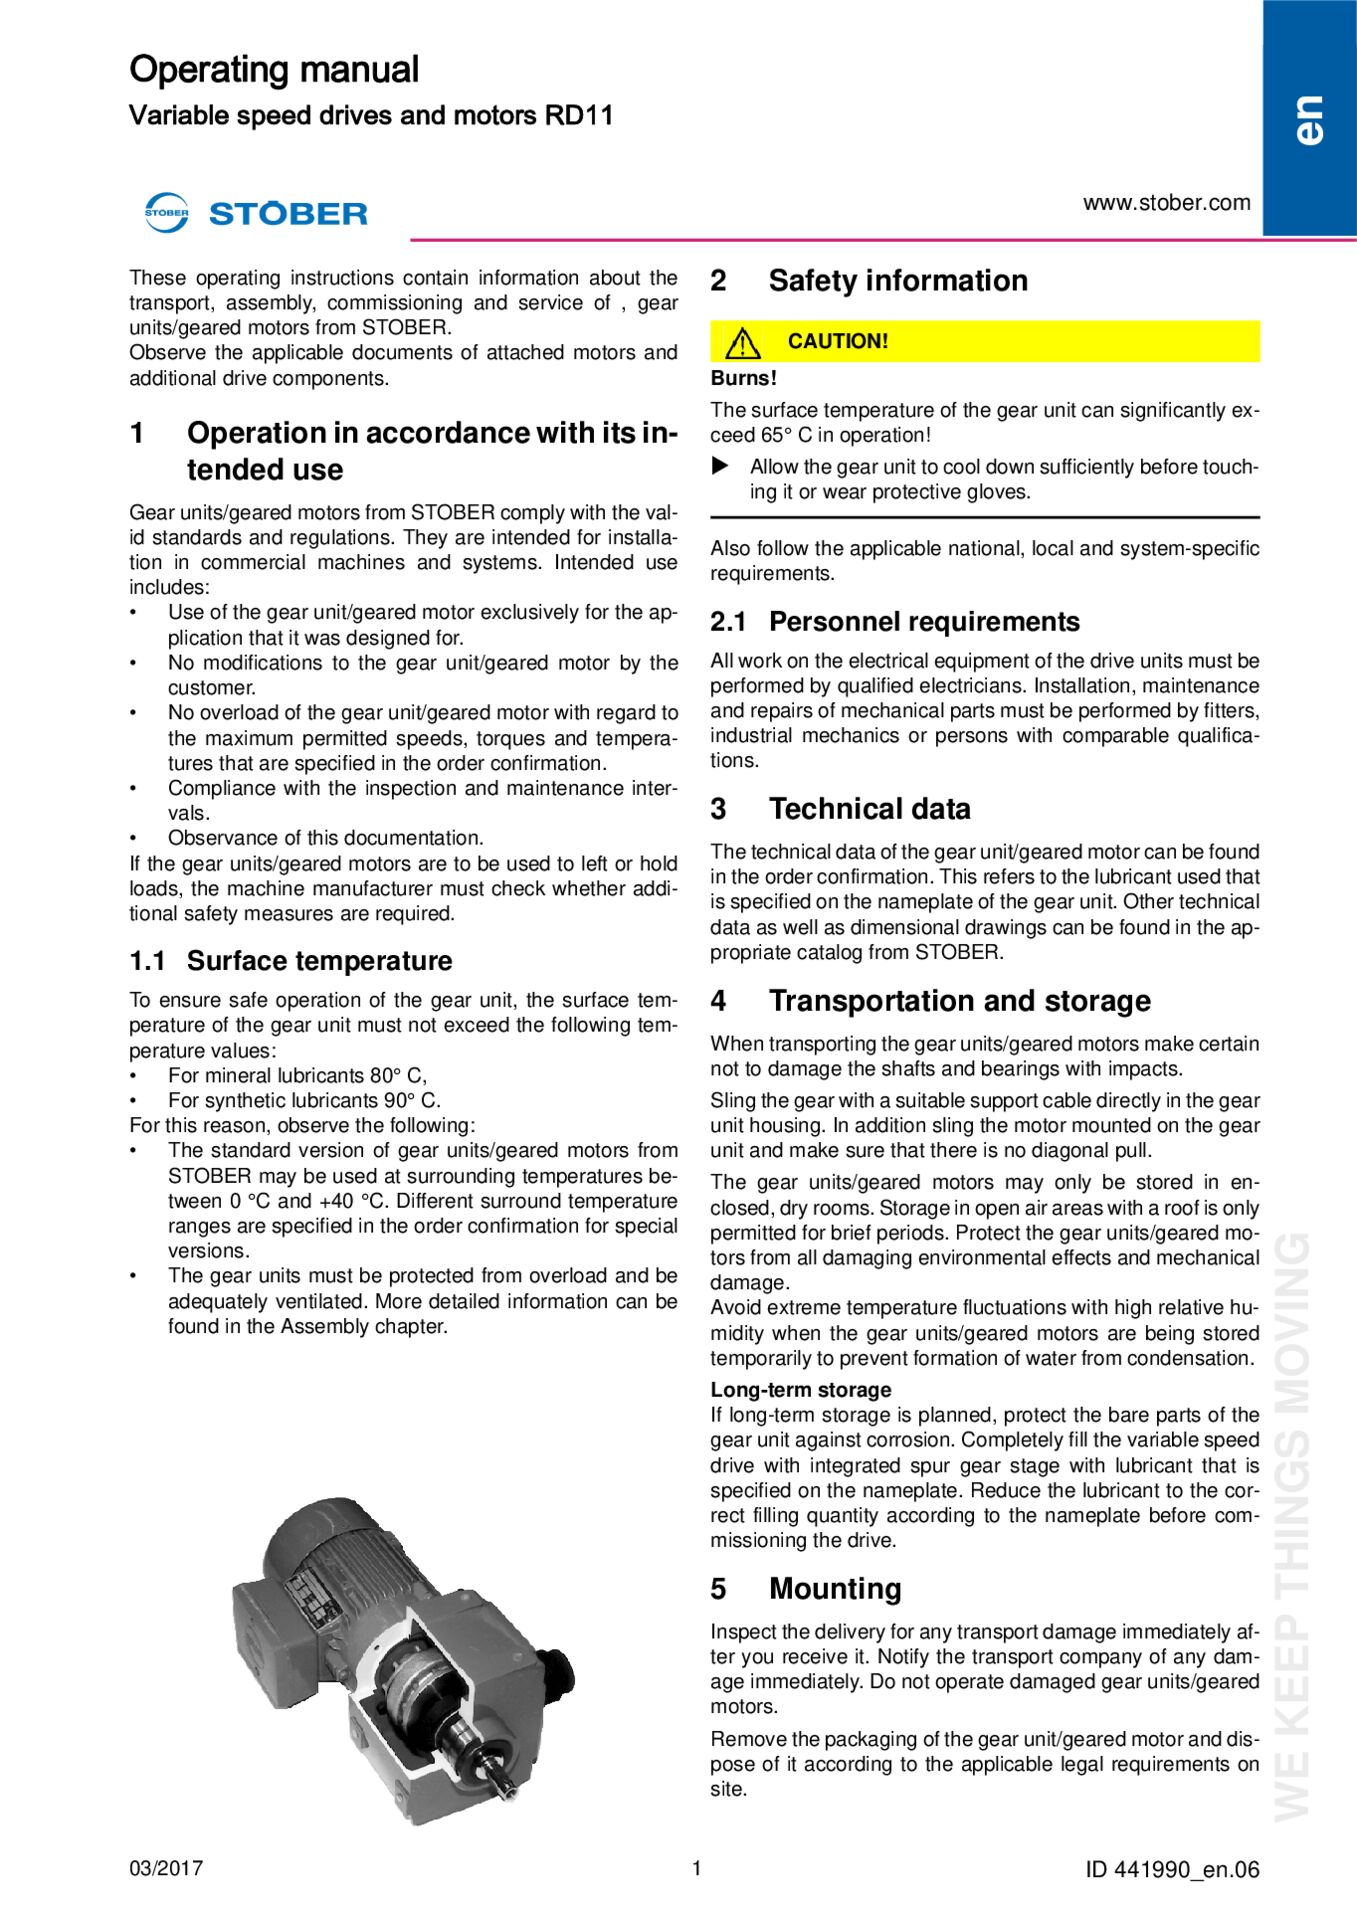 Operating instructions Variable speed drives and motors RD11